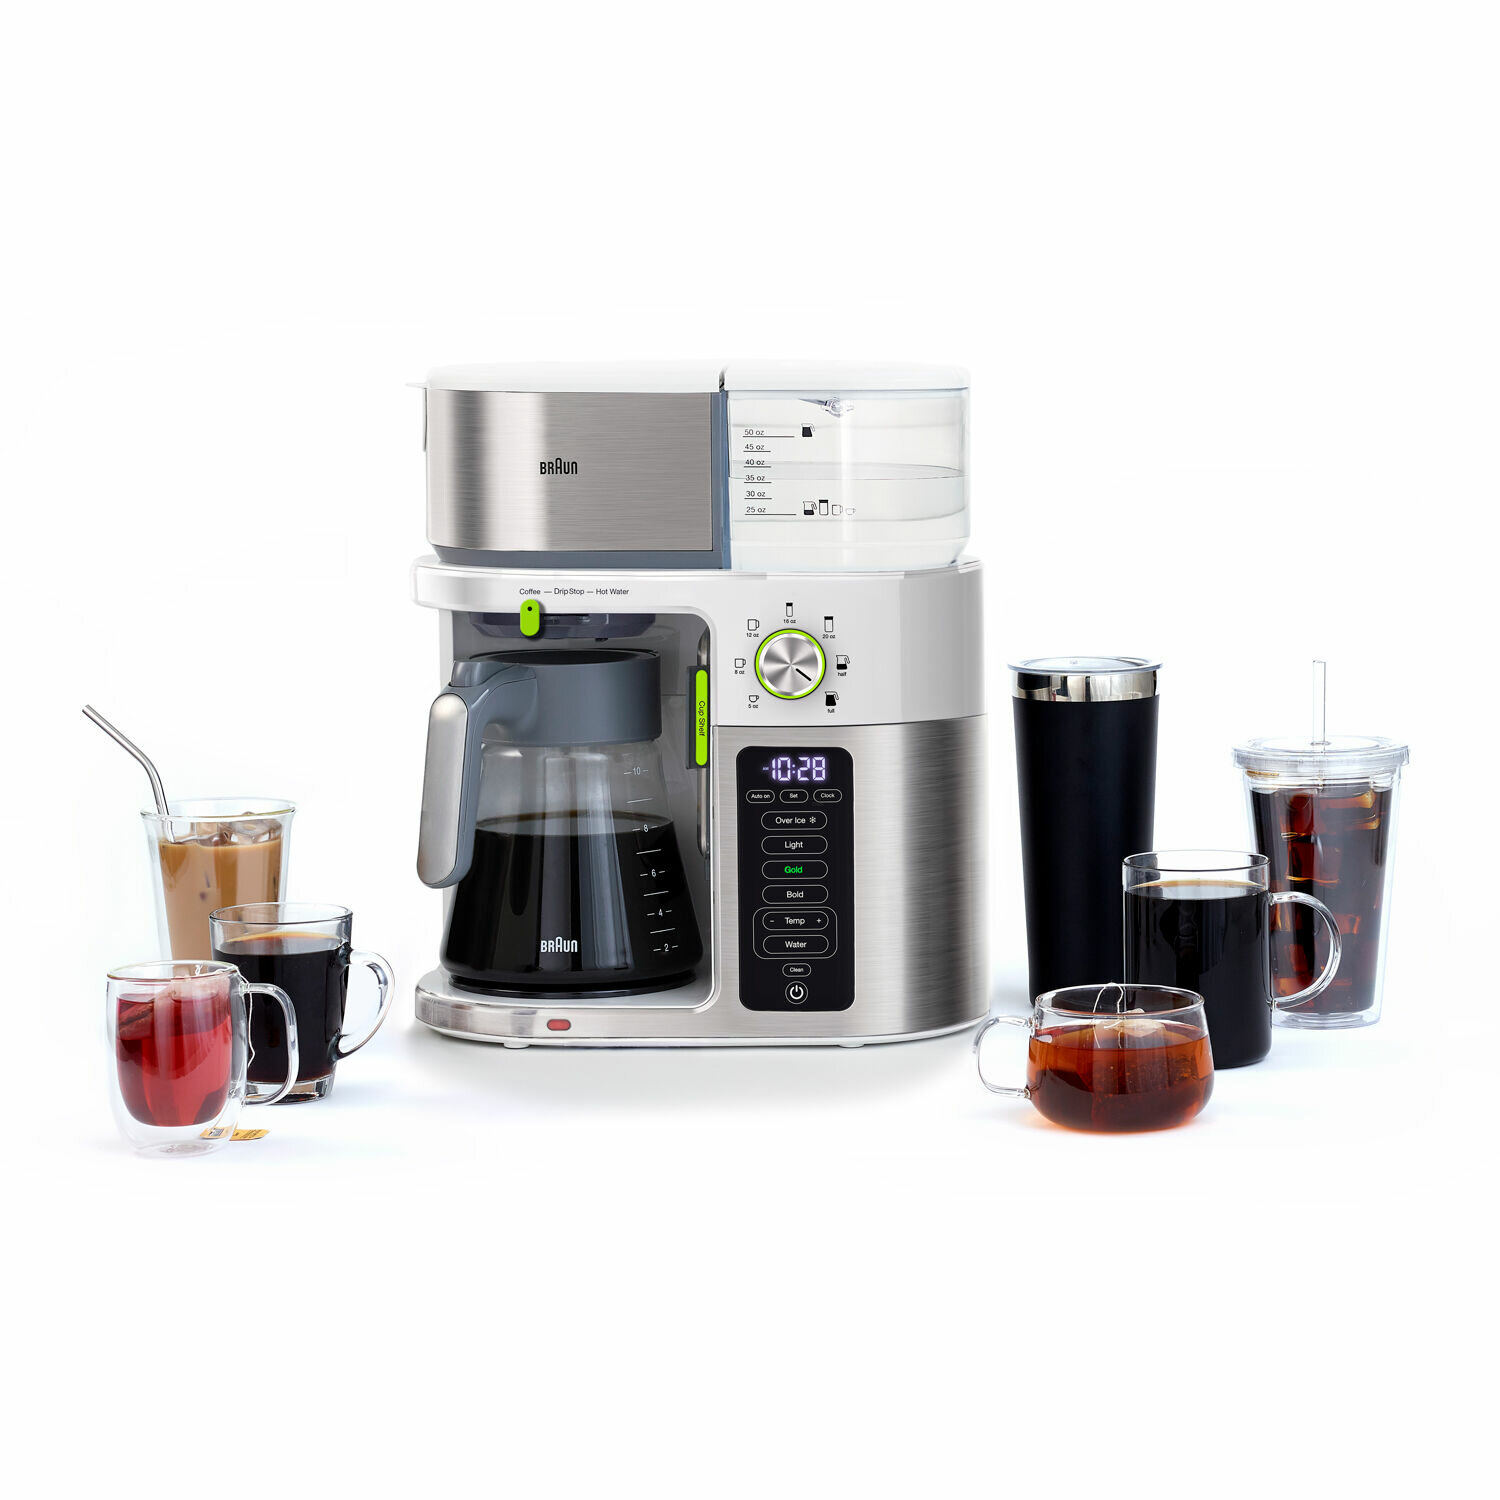 Braun 14-Cup PureFlavor Coffee Maker in Stainless Steel and Black